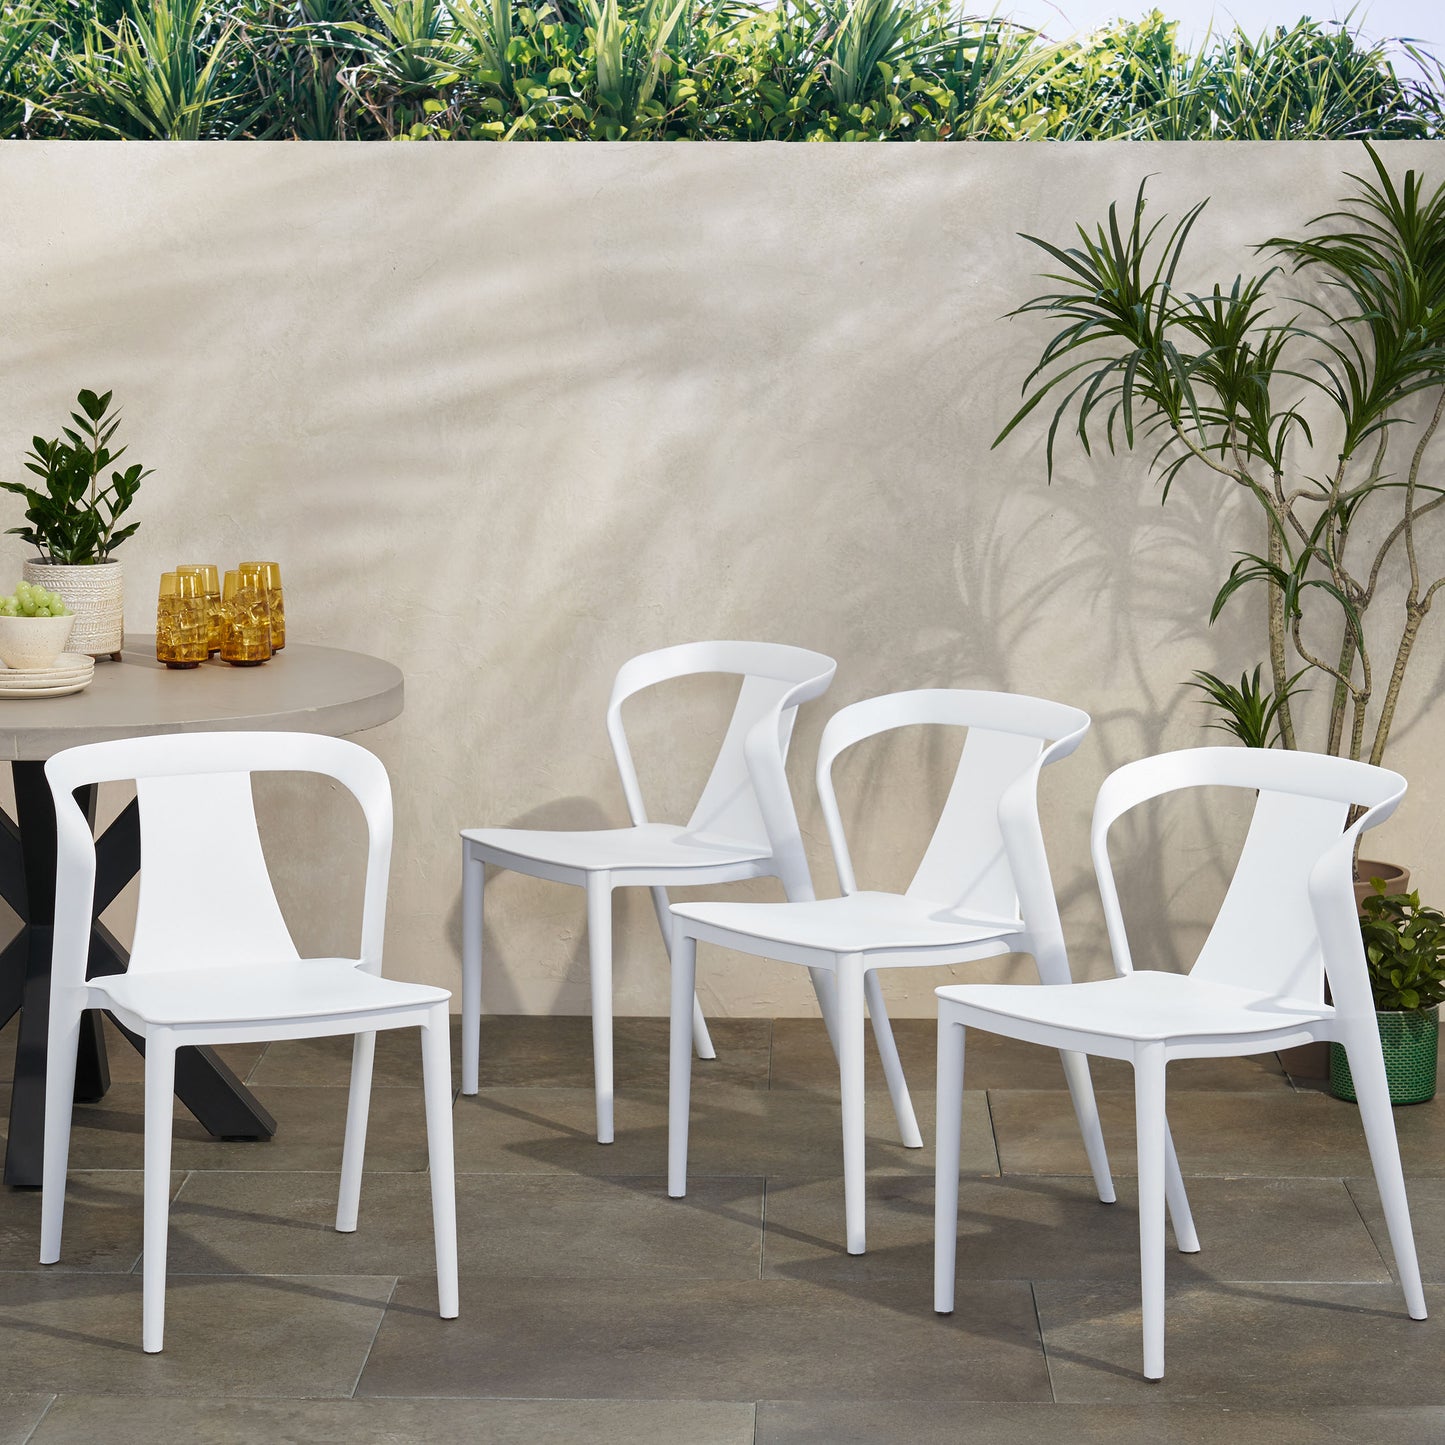 Janely Outdoor Stacking Dining Chair (Set of 4)